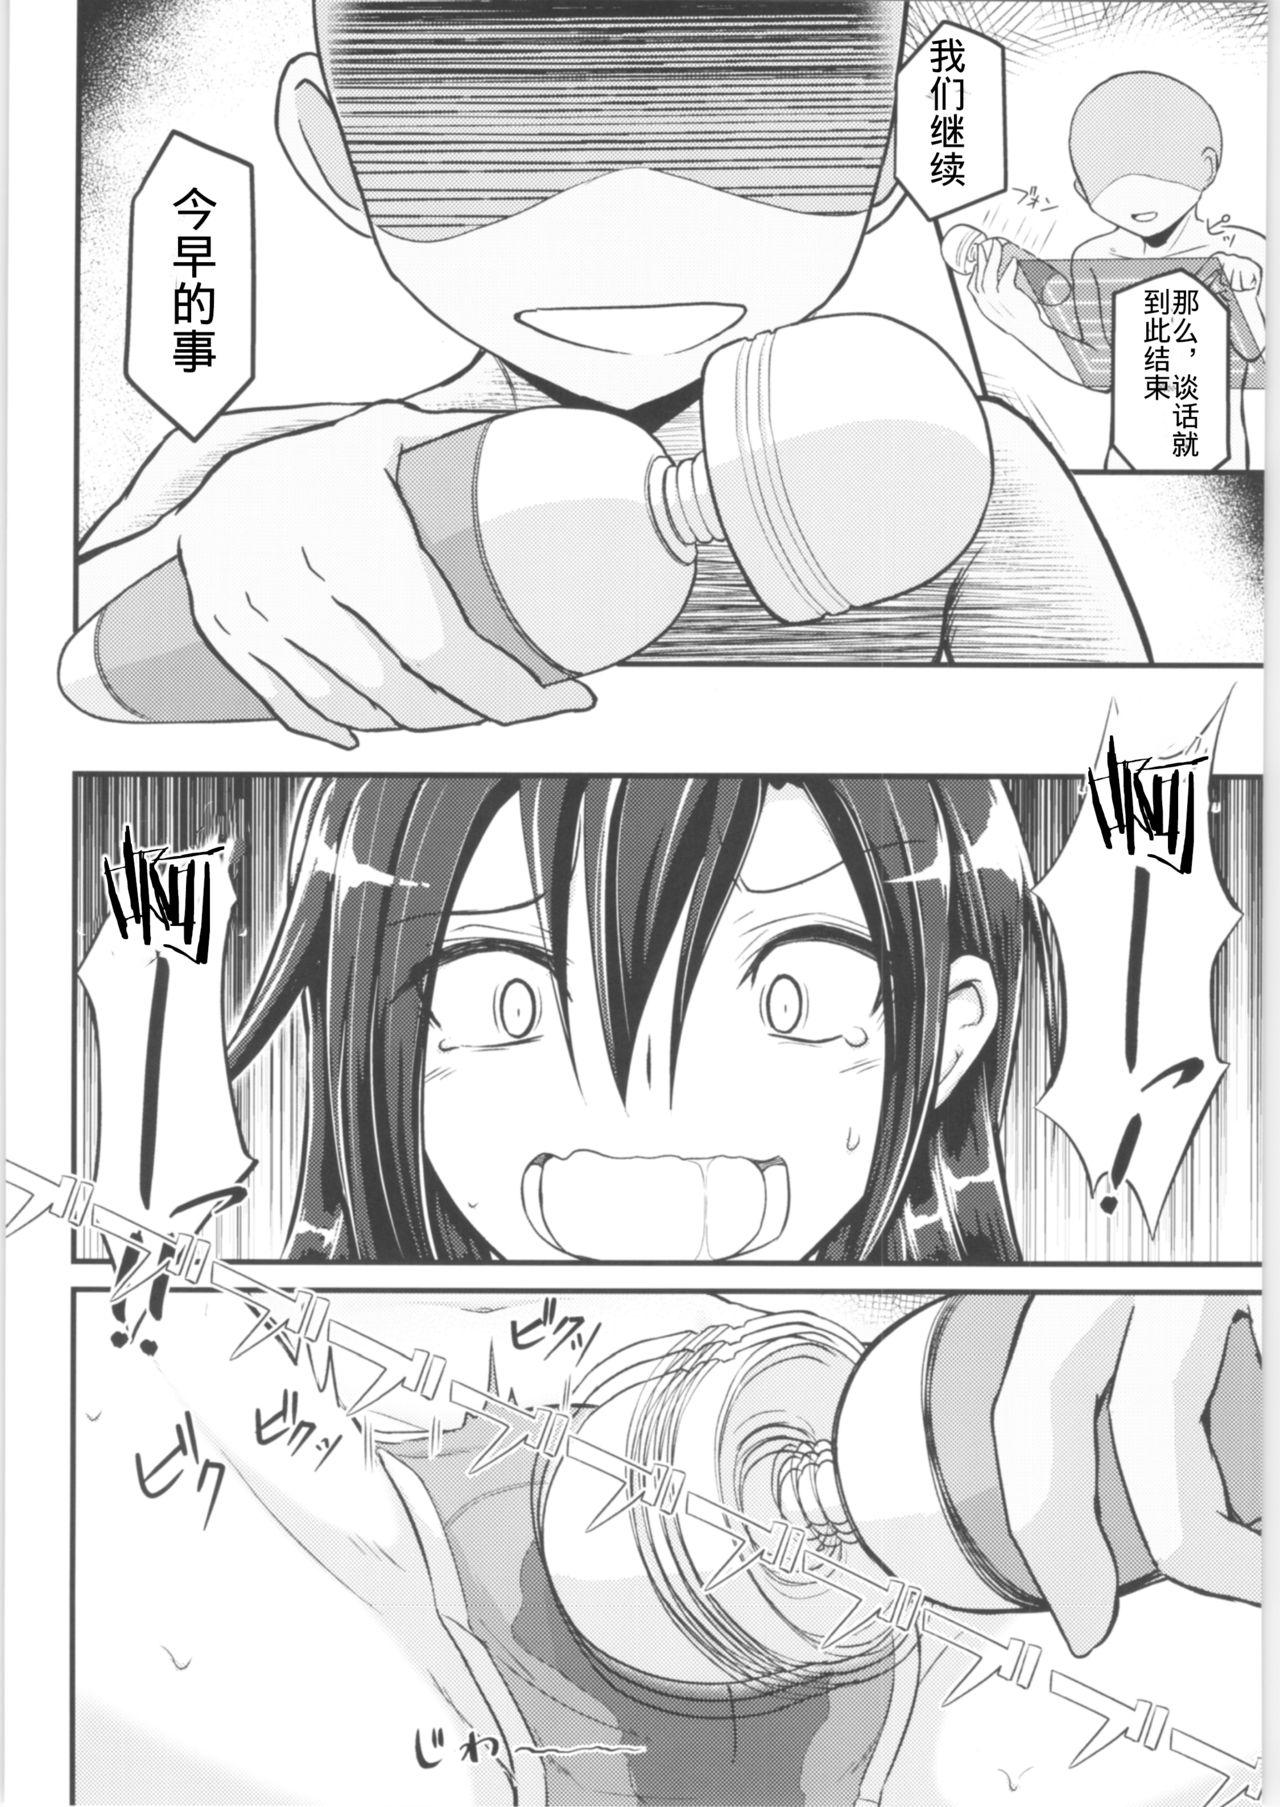 Ejaculations Kiriko Route Another #01 - Sword art online Muscular - Page 9